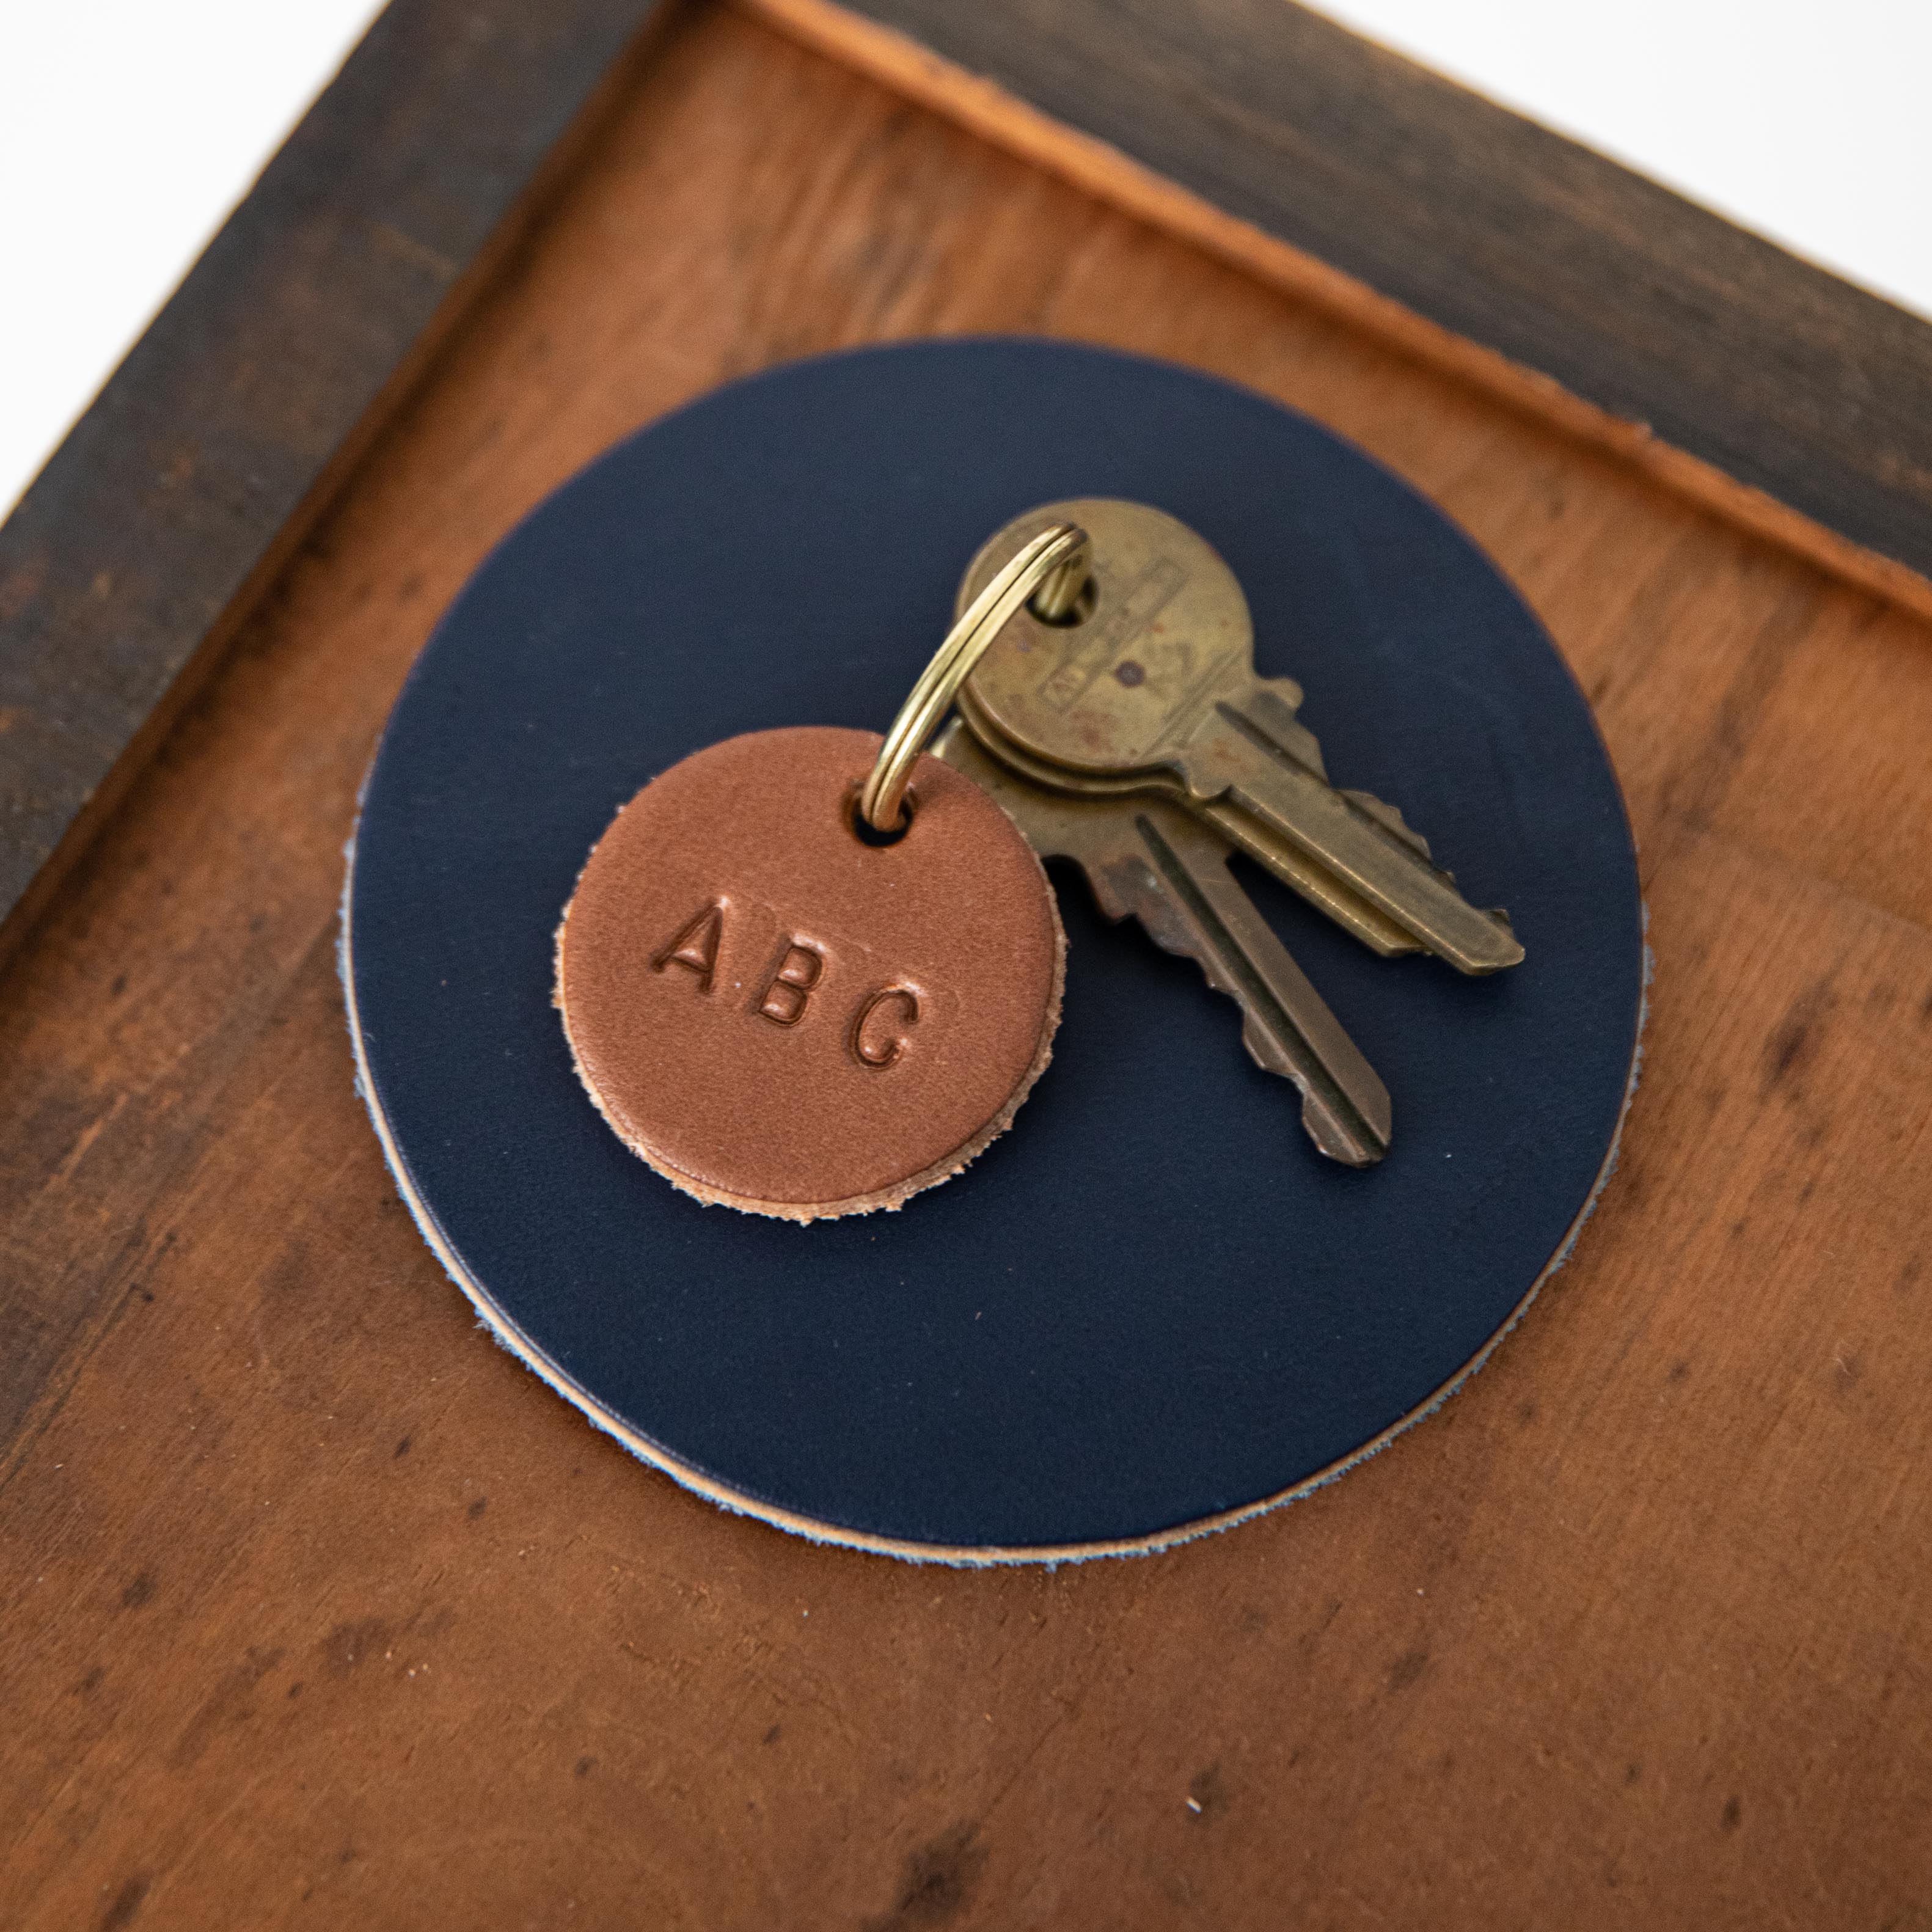 Tan Circle Key Fob | Leather Keychain made in America at KMM & Co.